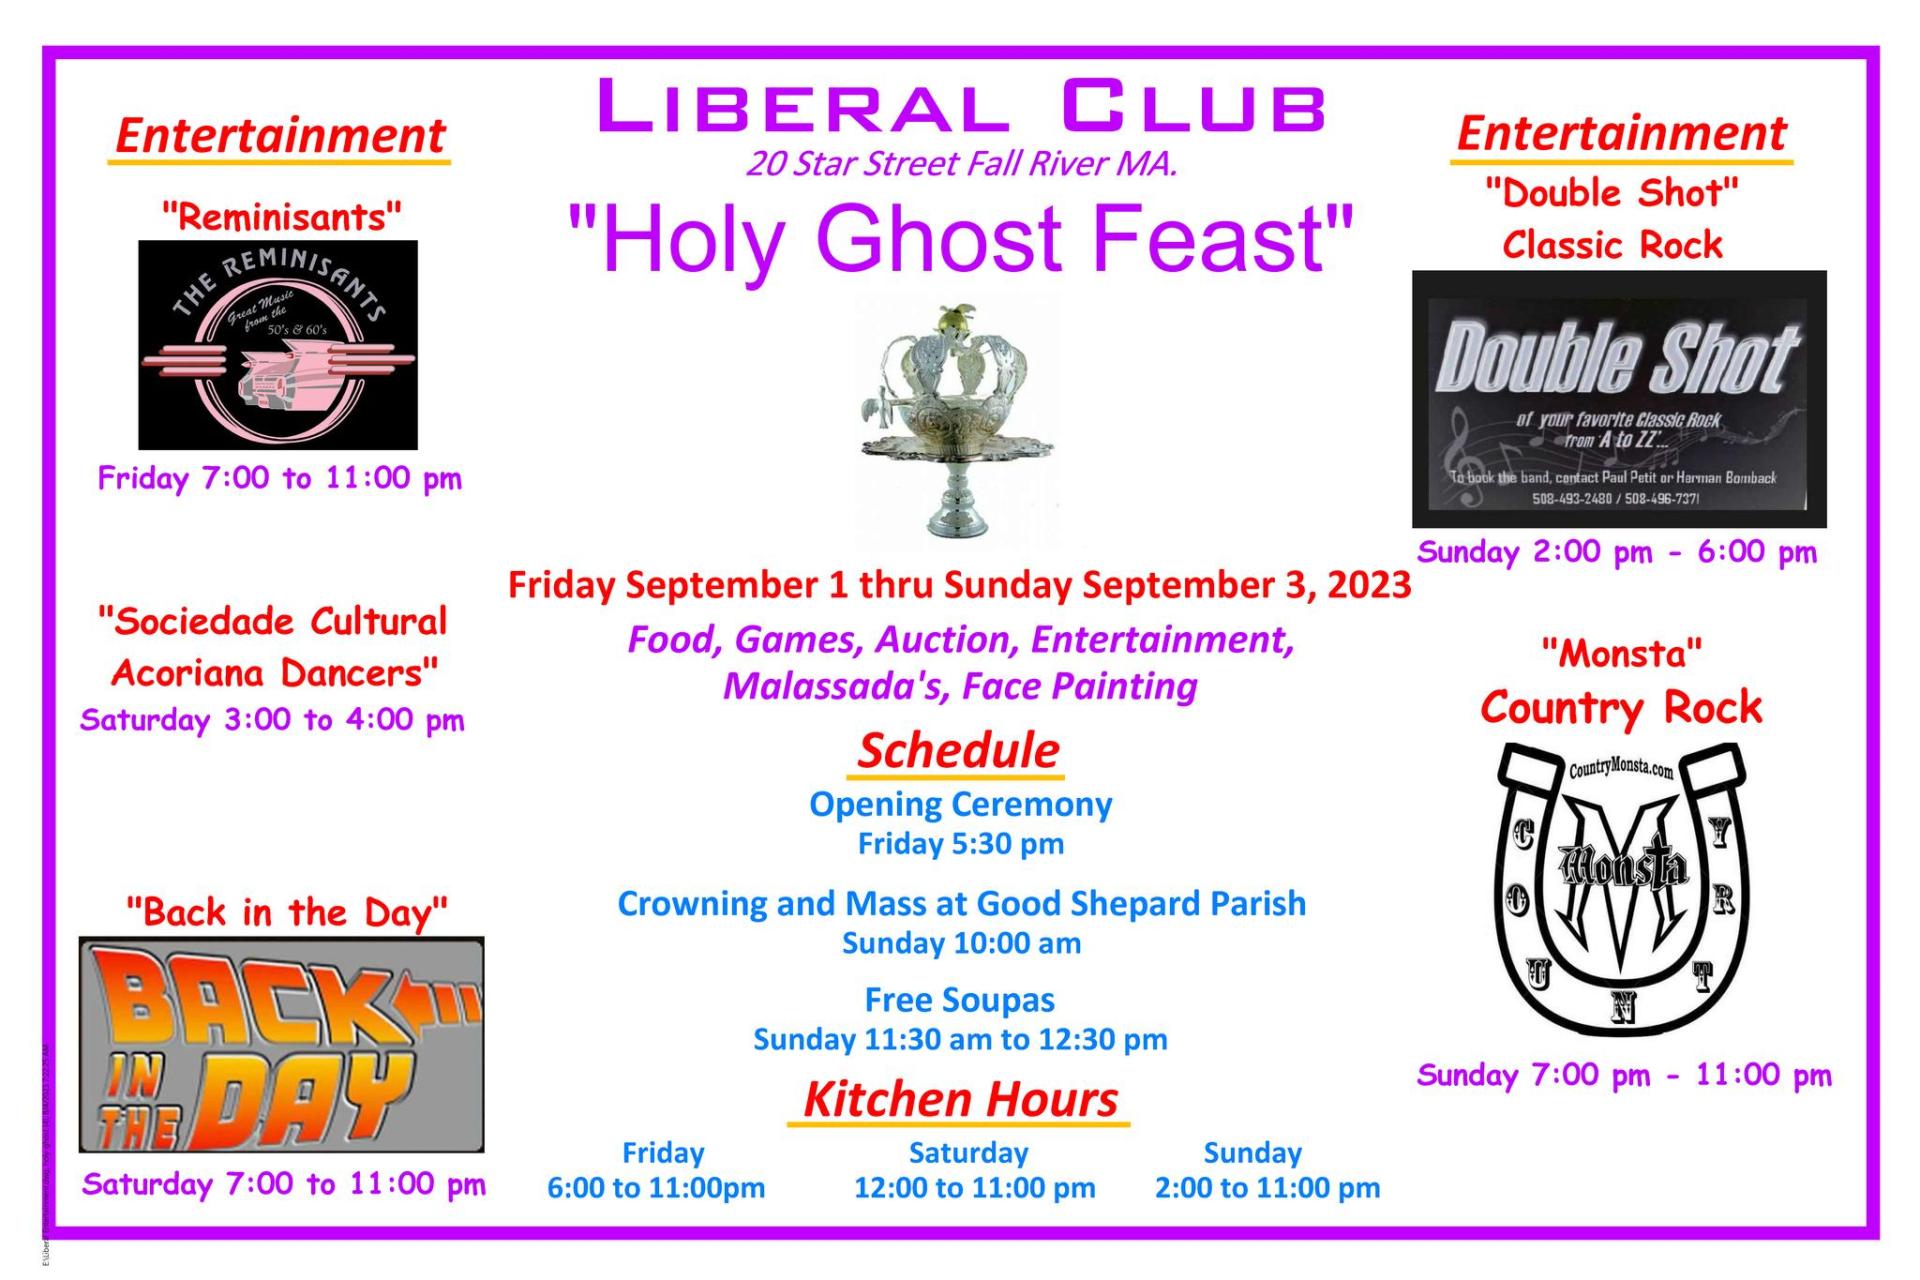 Liberal Club Holy Ghost Feast of the Trinidade Viva Fall River